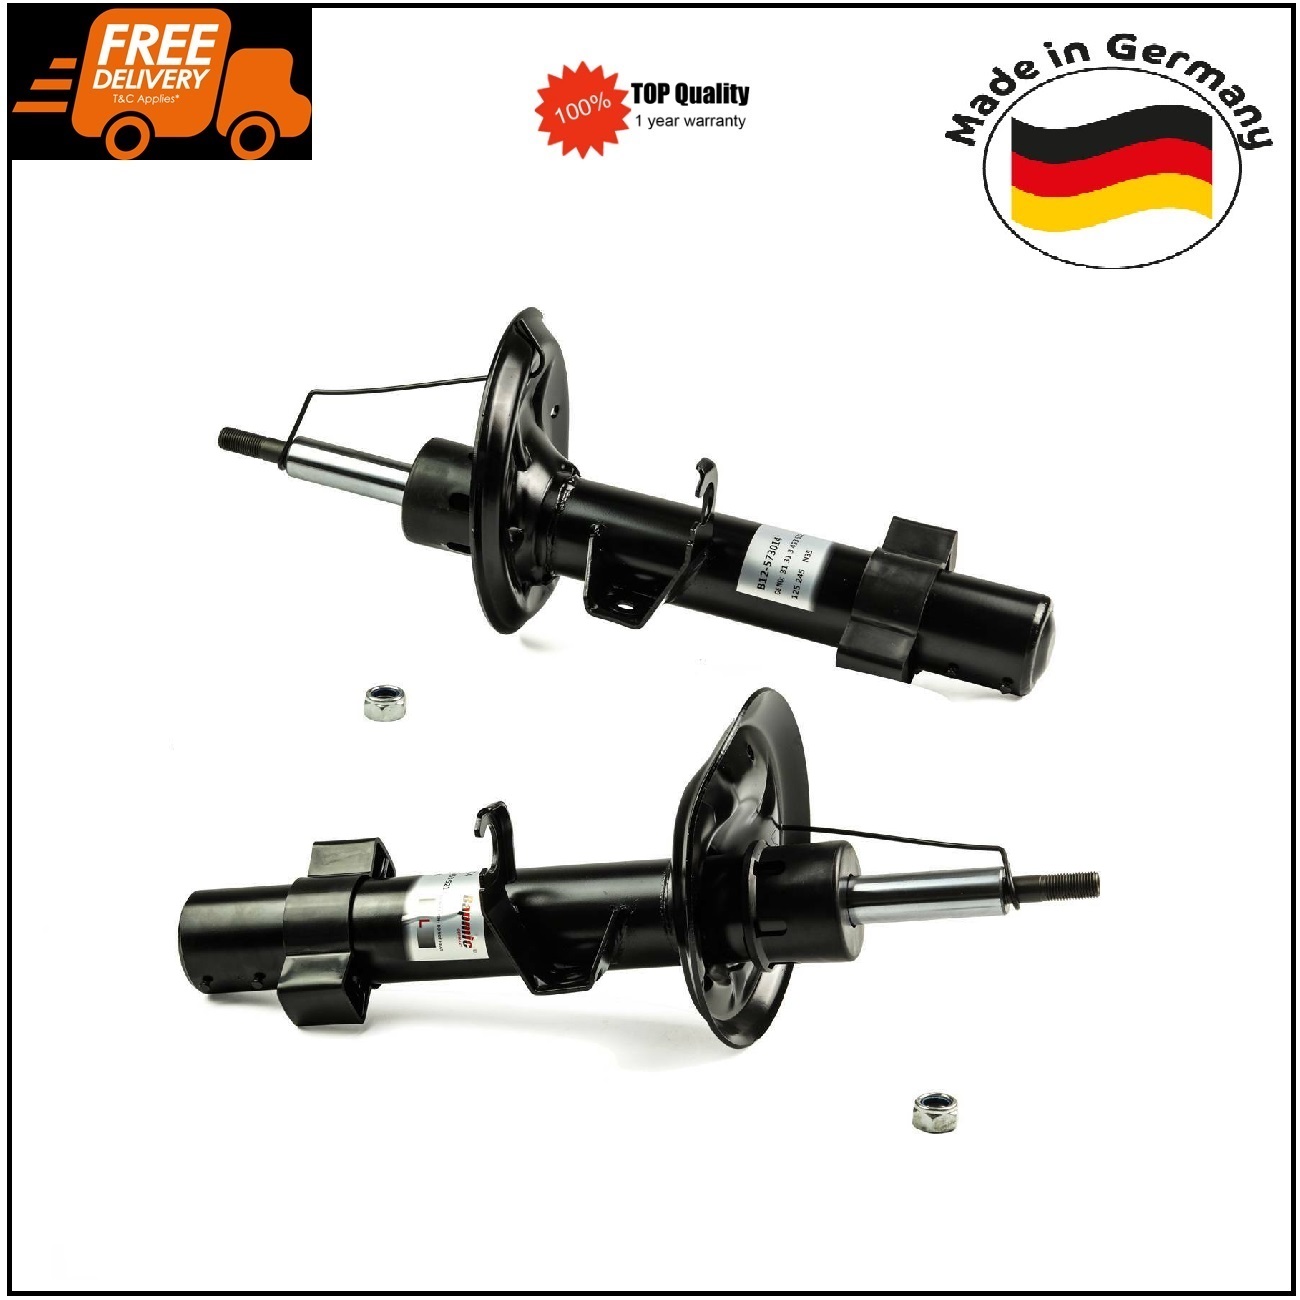 2x Front Shock Absorber for BMW E83 X3 2003-2011 31313453521 31313453522 German Made